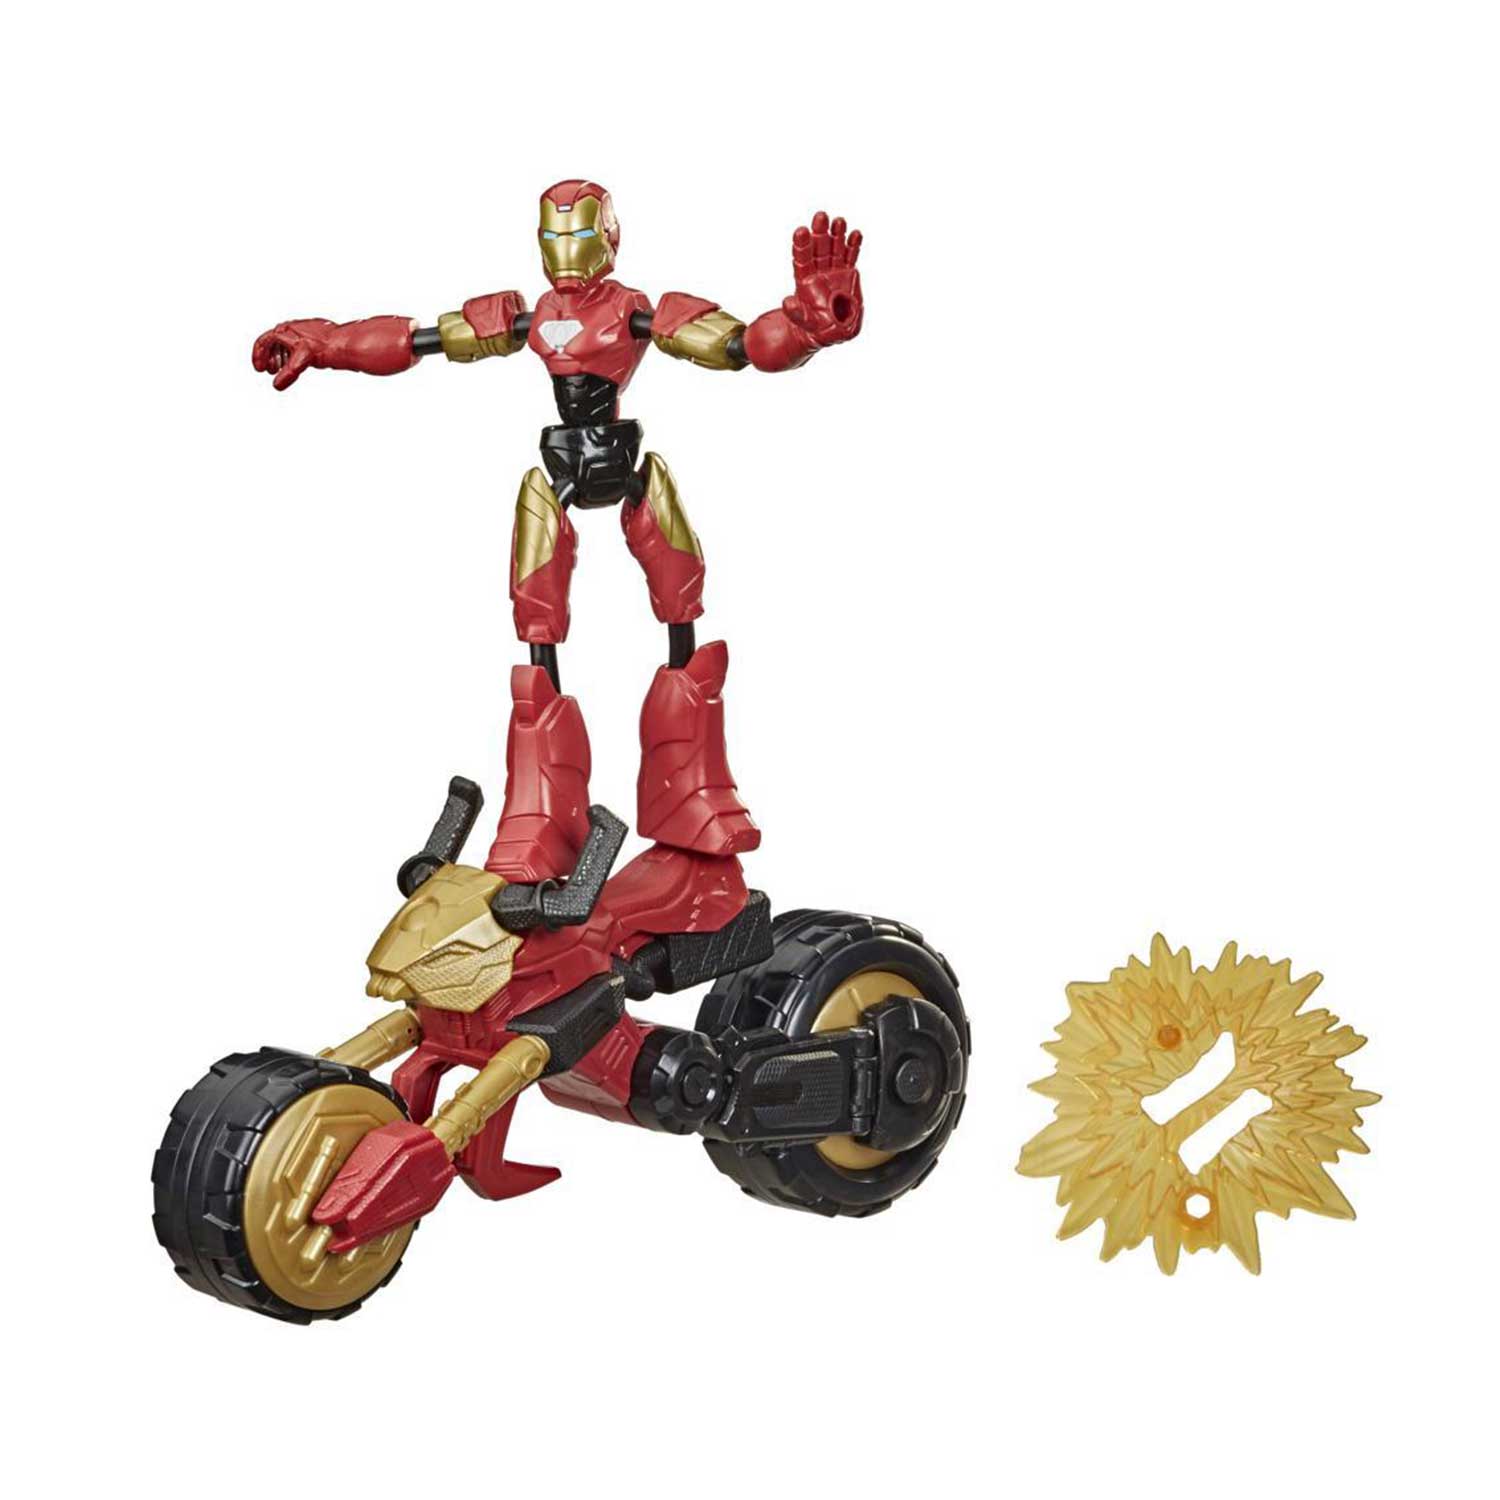 Marvel Bend and Flex, Flex Rider Iron Man Action Figure Toy, 6-Inch Figure and Motorcycle - Mod: HSBF02445L0